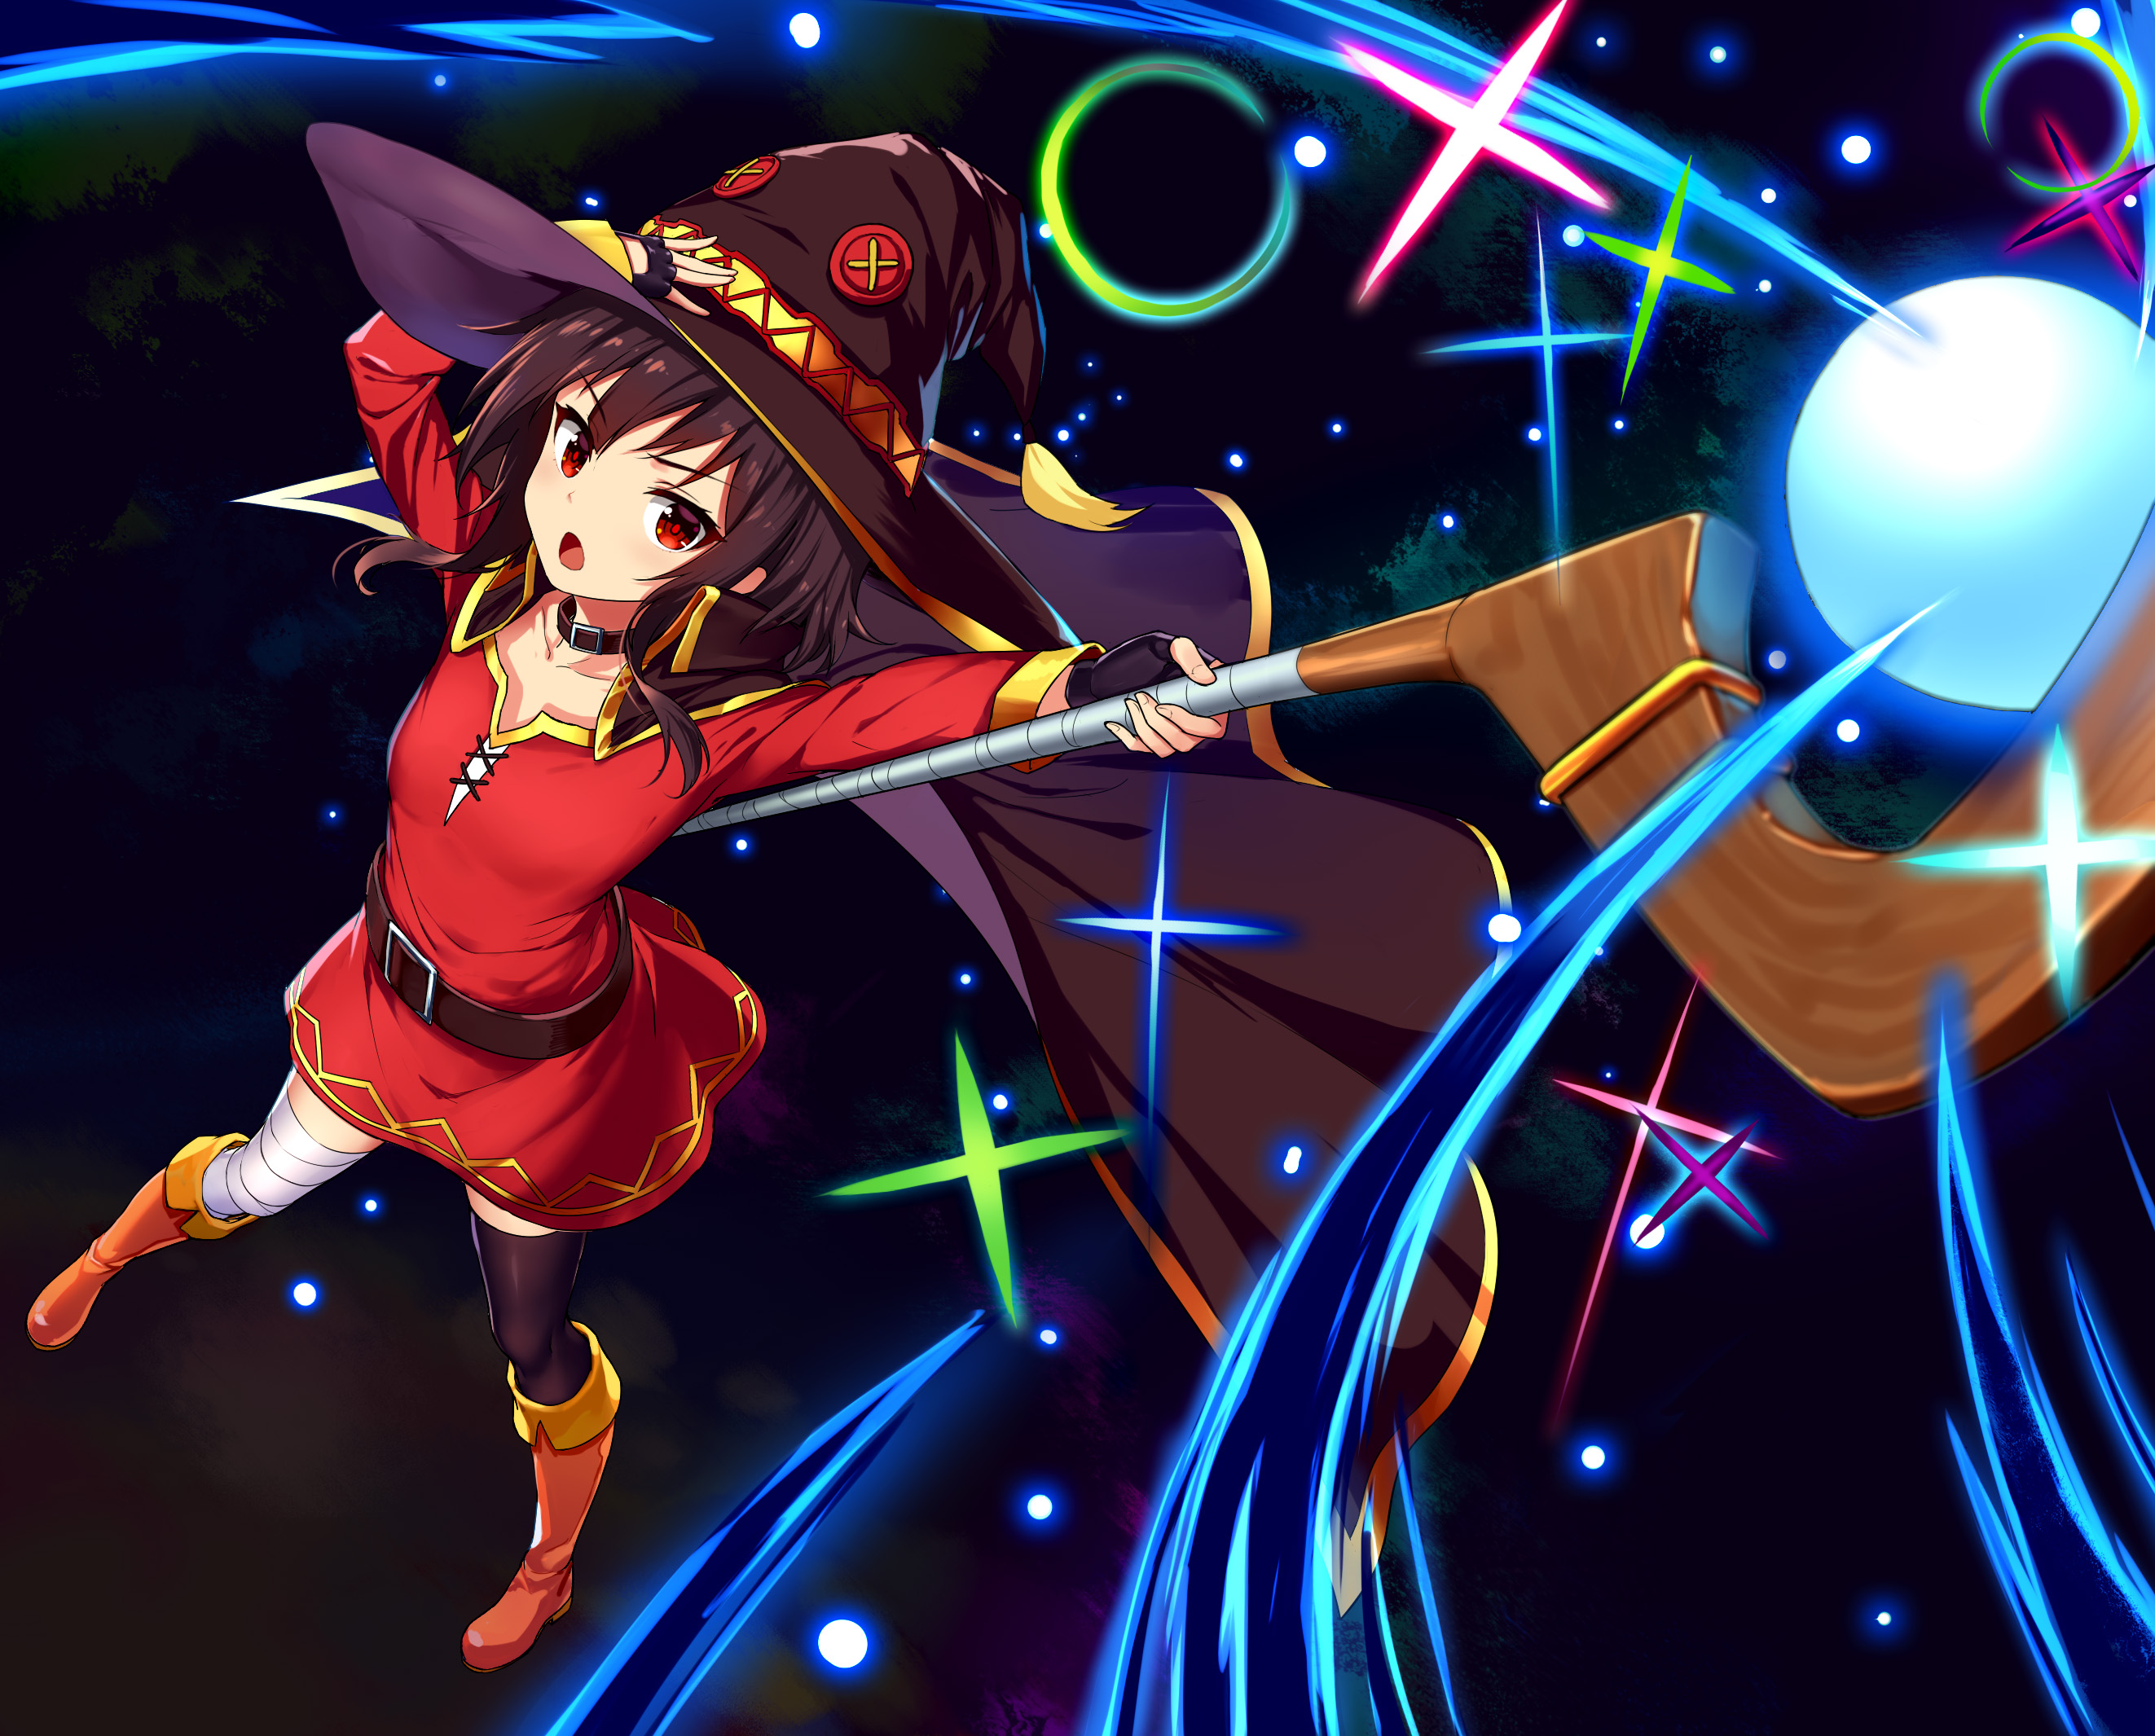 Explosion Megumi Chan Full HD Wallpaper And Background